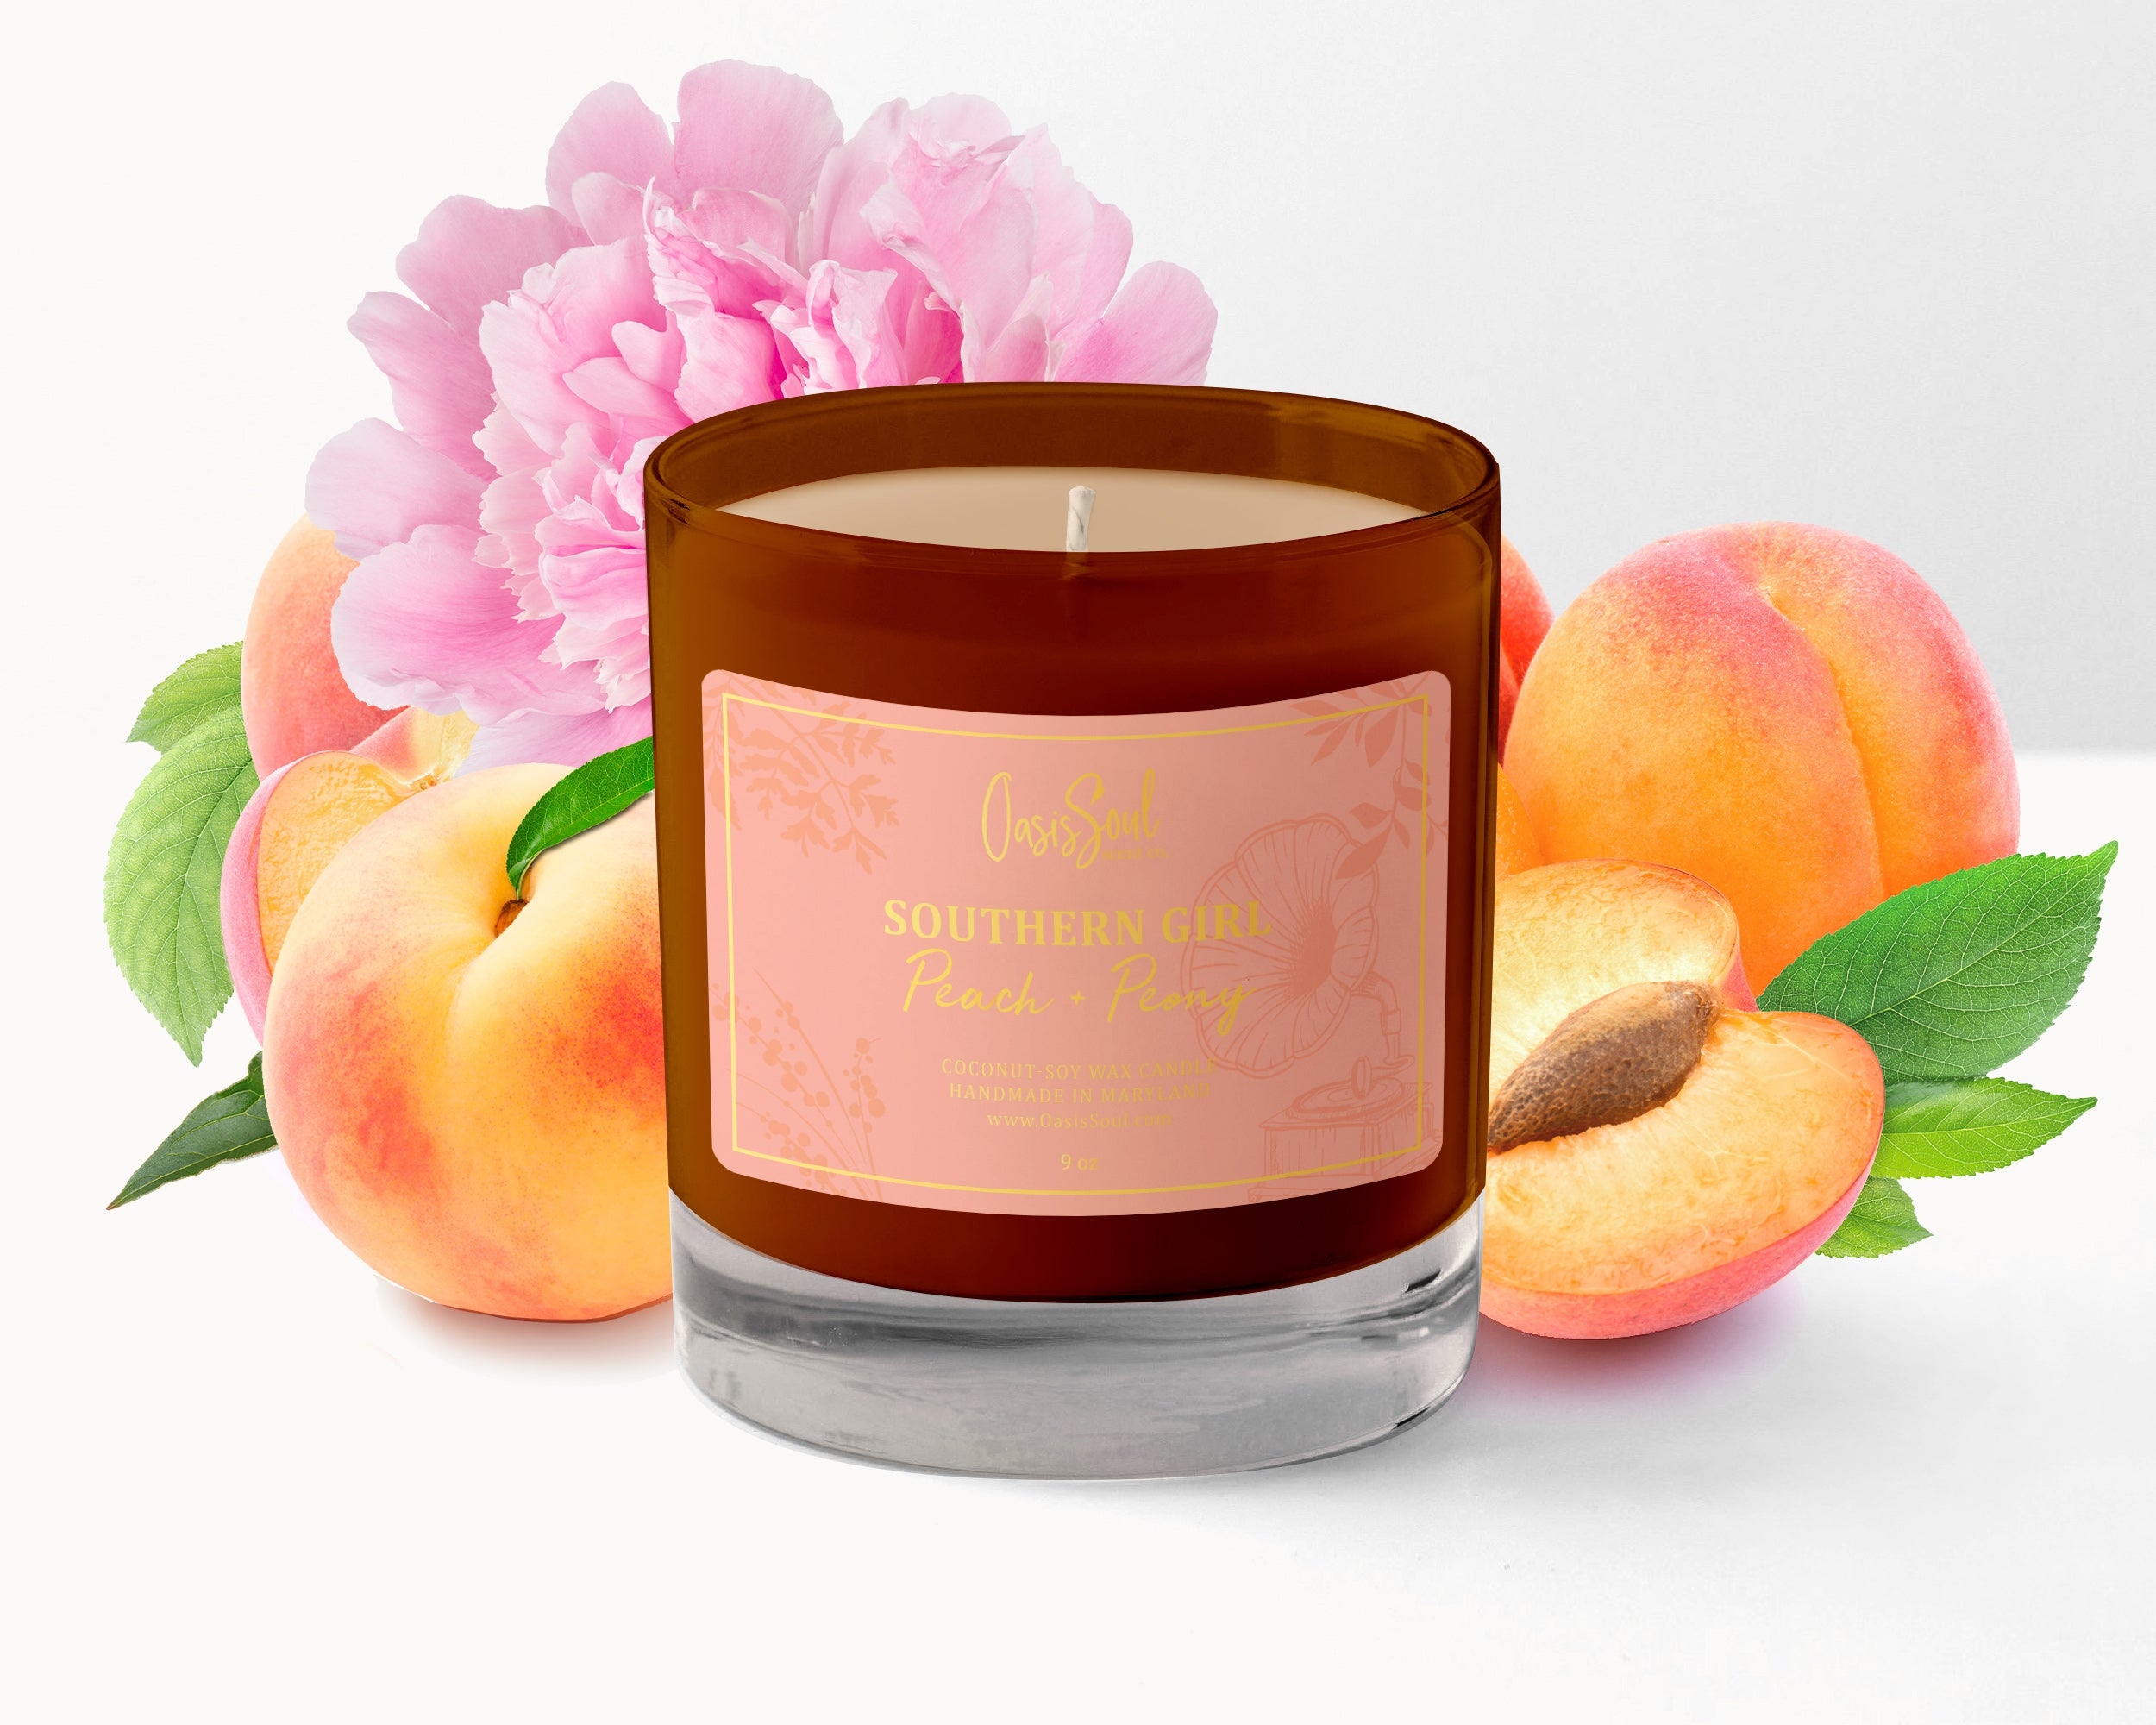 BELIEVE IN YOURSELF- Georgia Peach Wax Melts – Body and Soul Experience